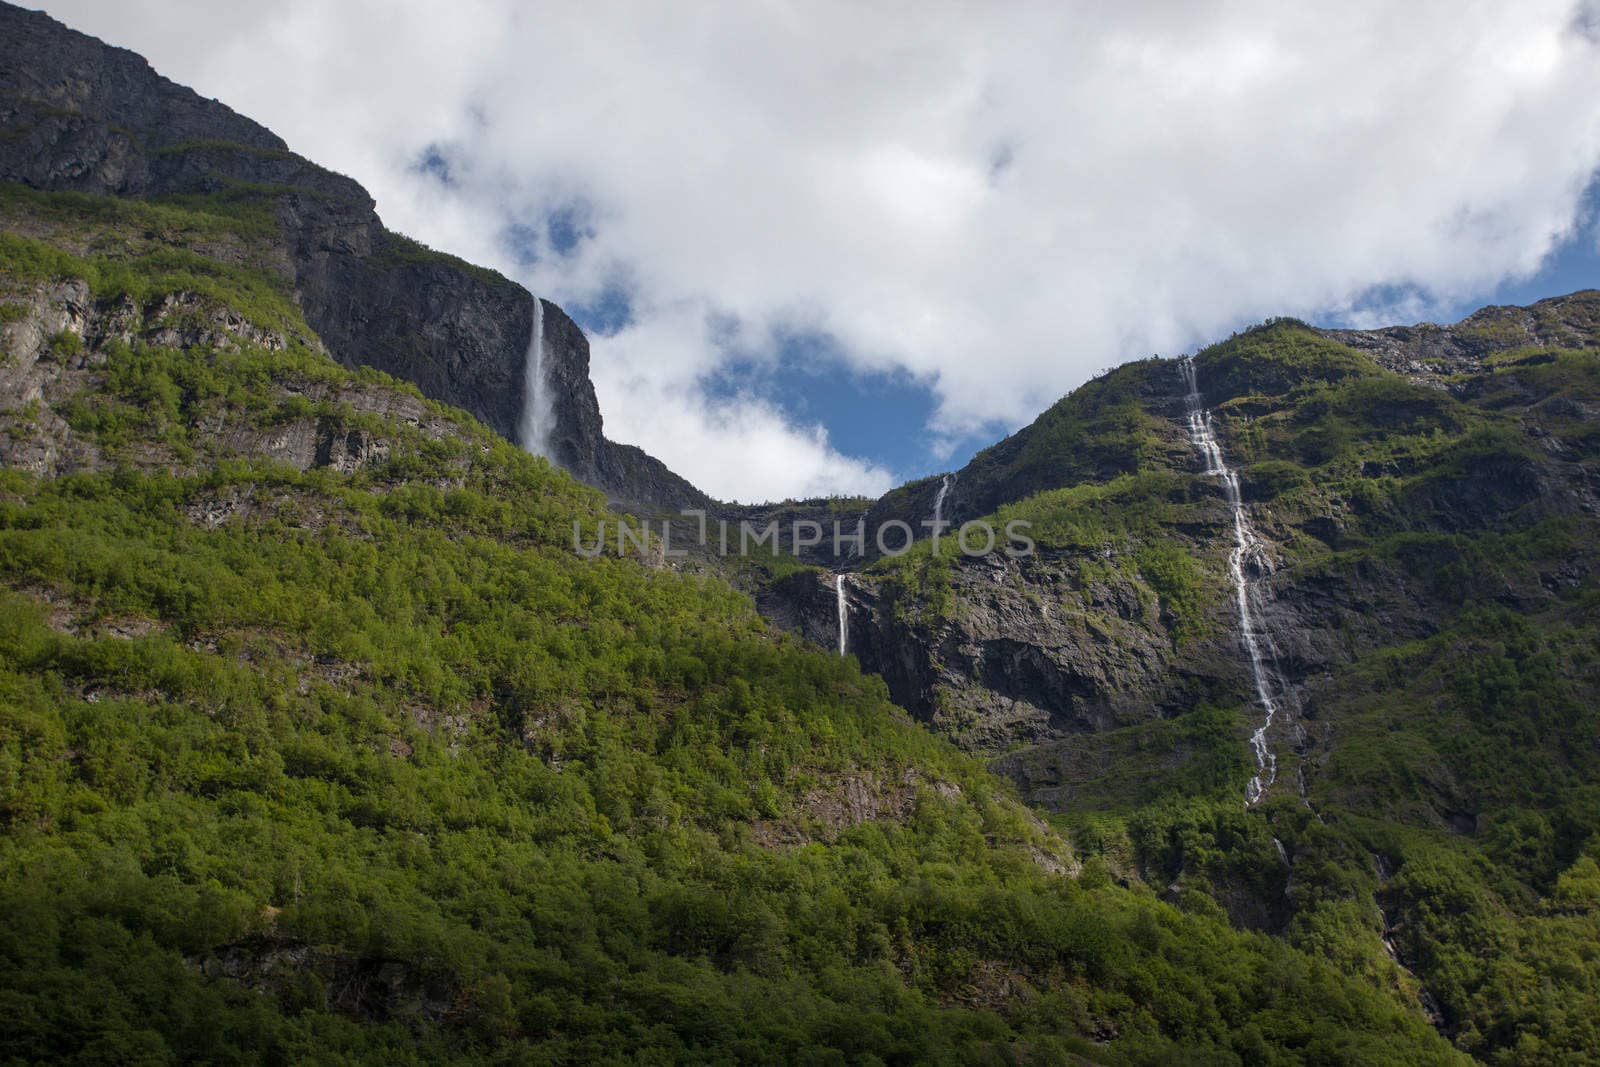 The pictures are from the western part of Norway, where the narrow fjords and mountain scenery make wild overwhelming.